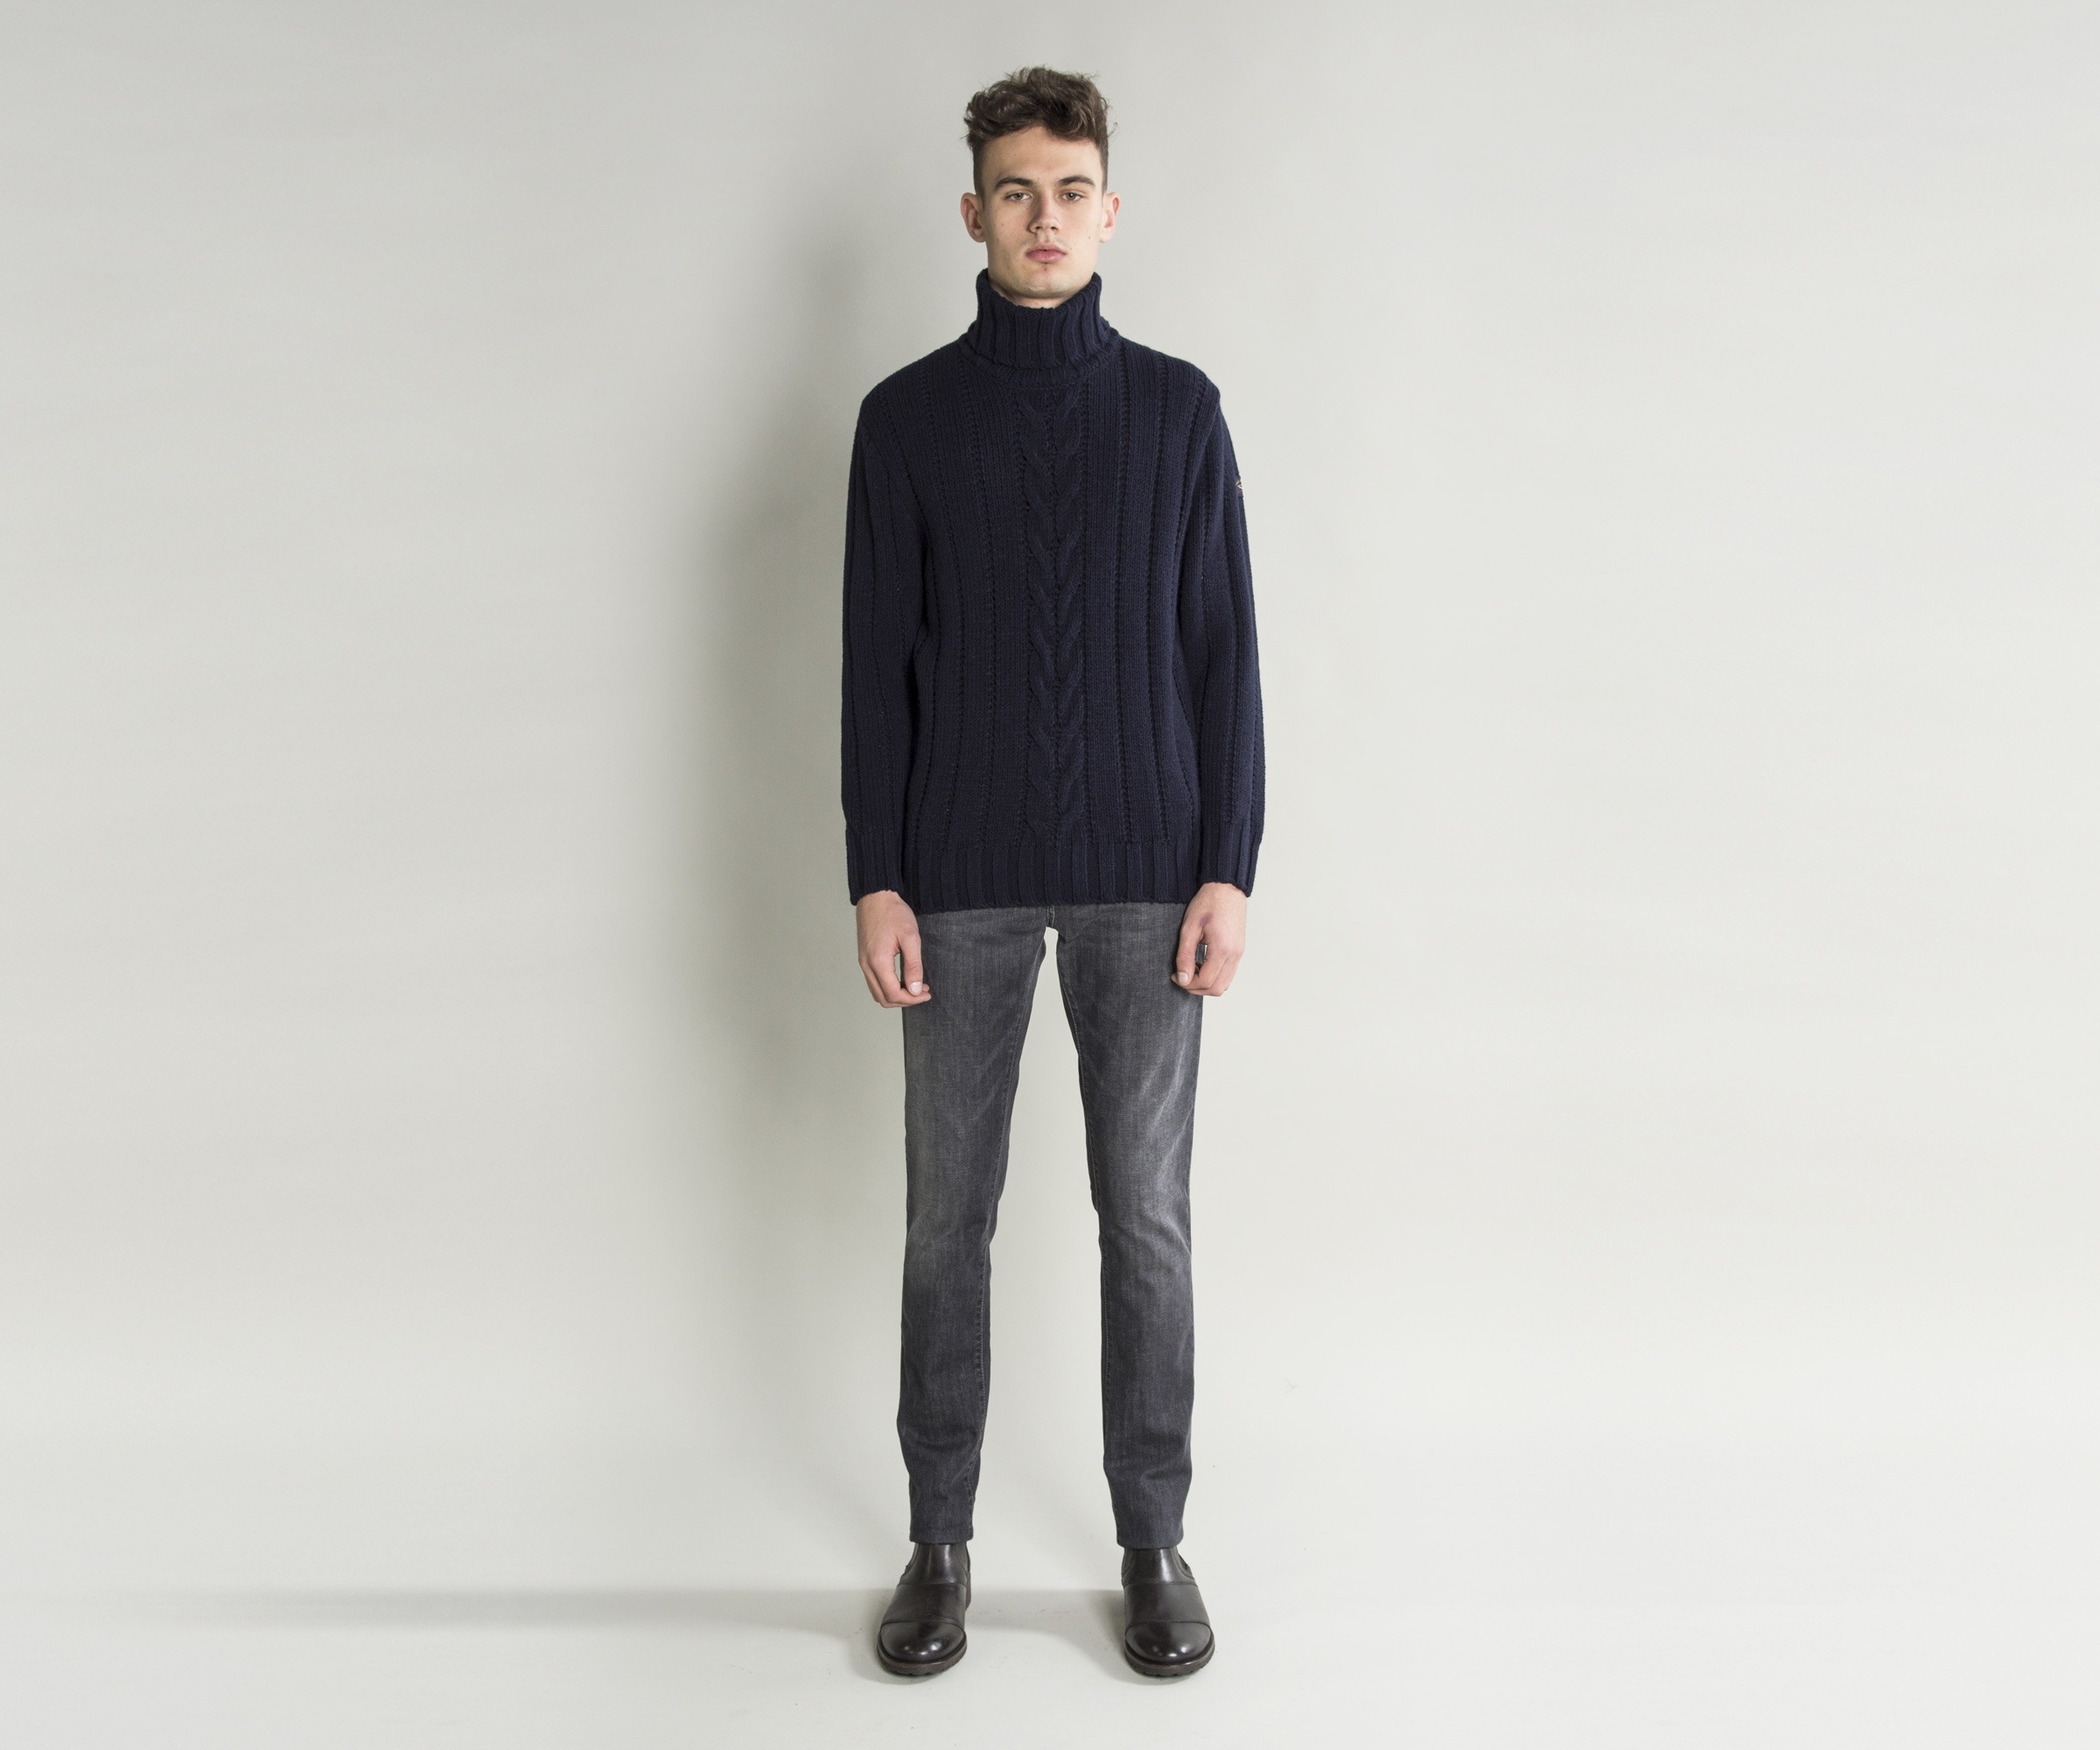 Paul & Shark 'Fisherman Collection' Chunky Roll Neck Knit Navy